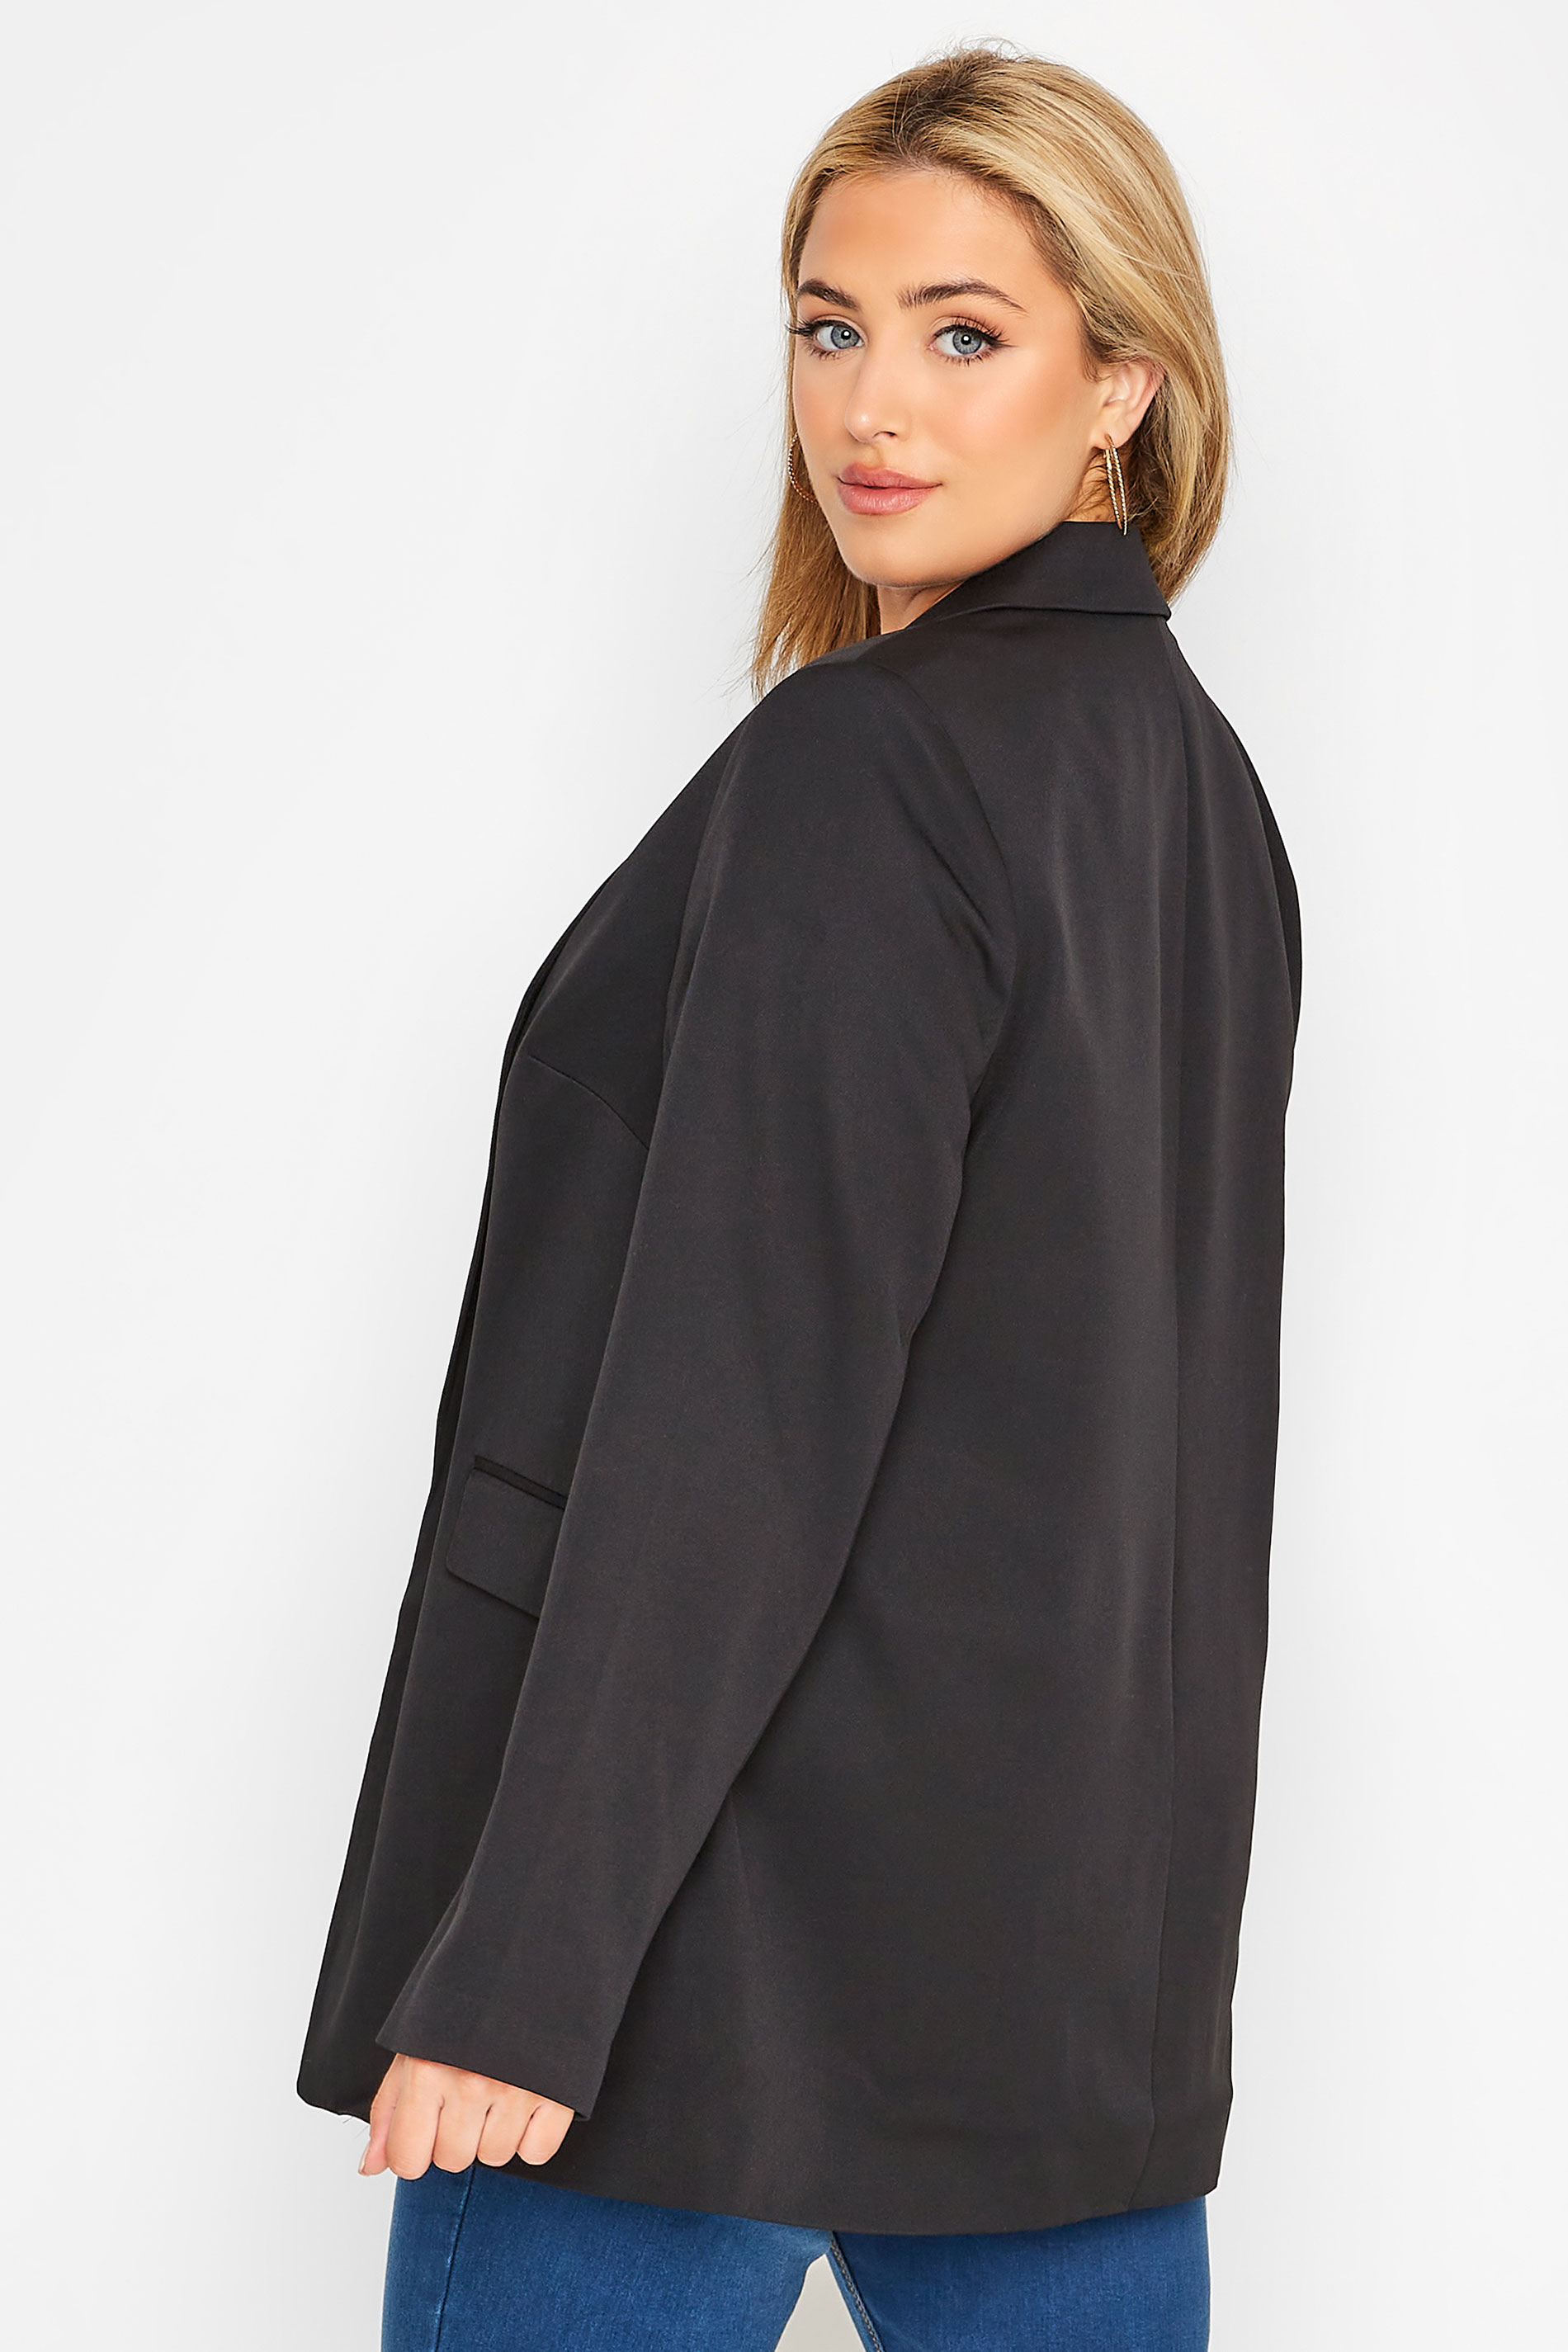 Plus Size Black Lined Blazer | Yours Clothing 3